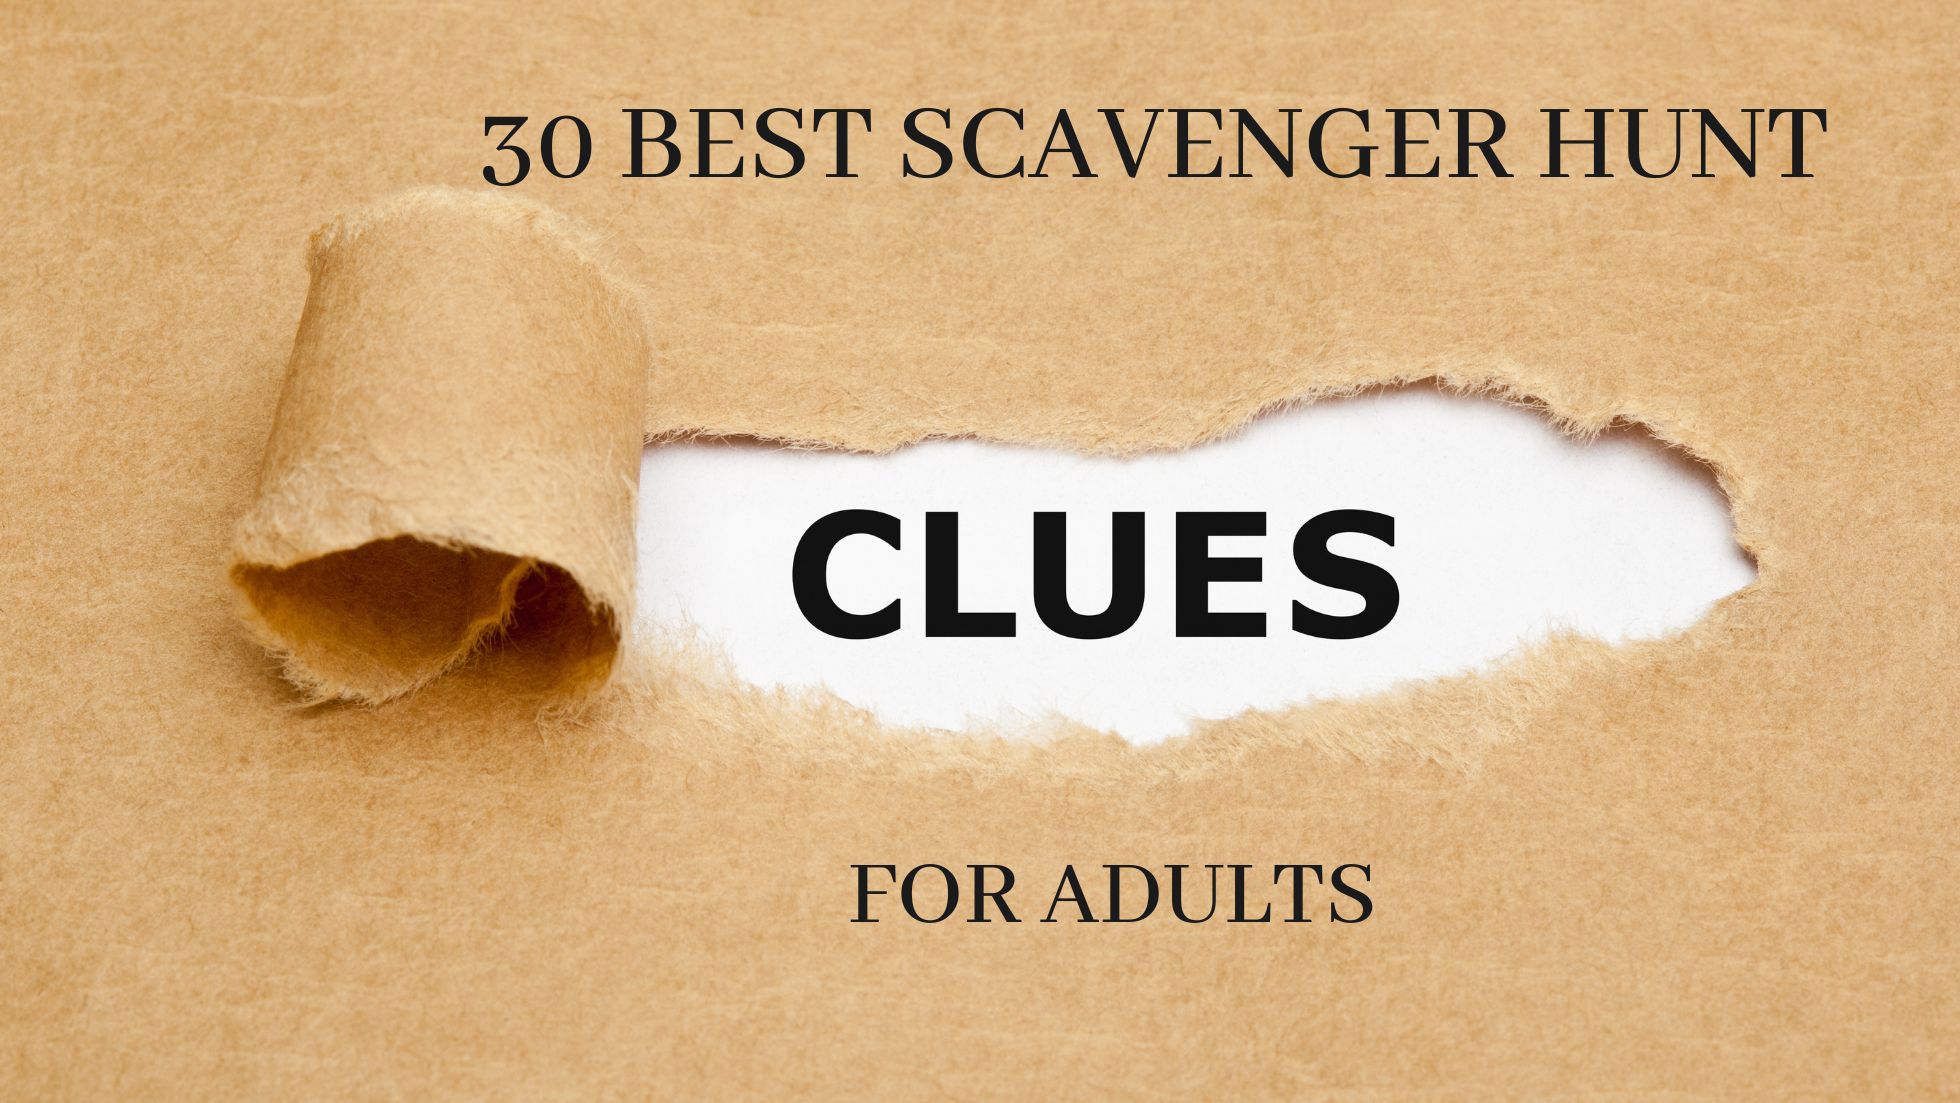 30 Best Scavenger Hunt Clues For Adults